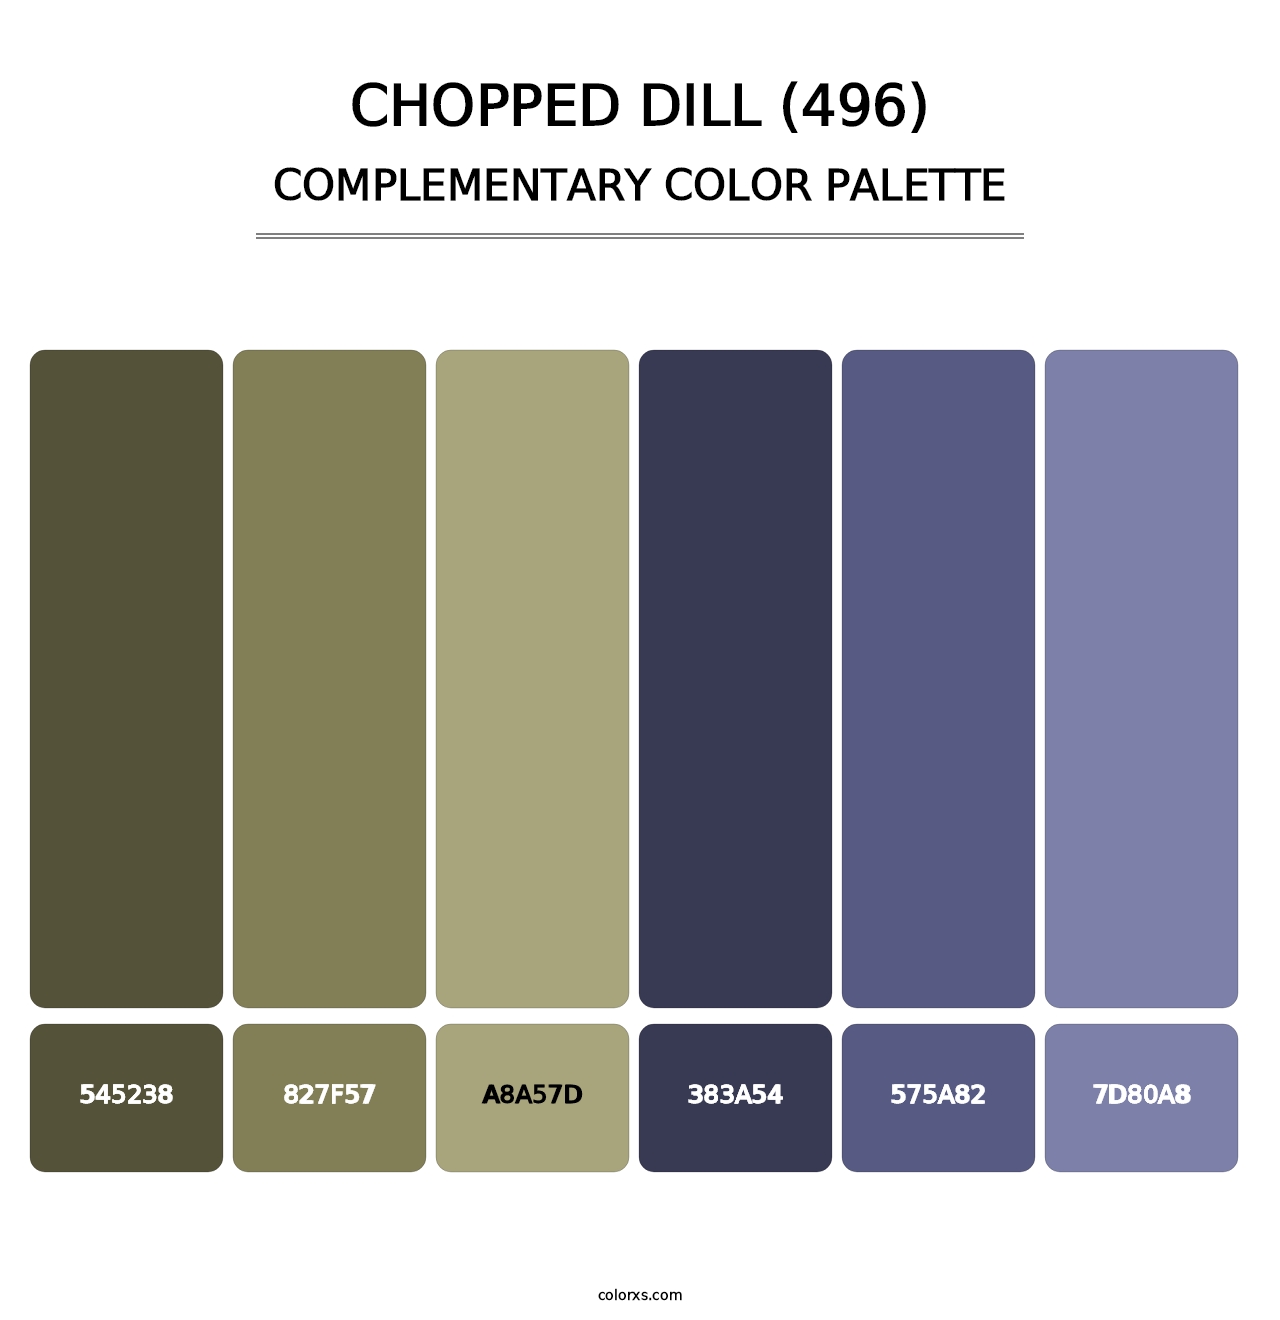 Chopped Dill (496) - Complementary Color Palette